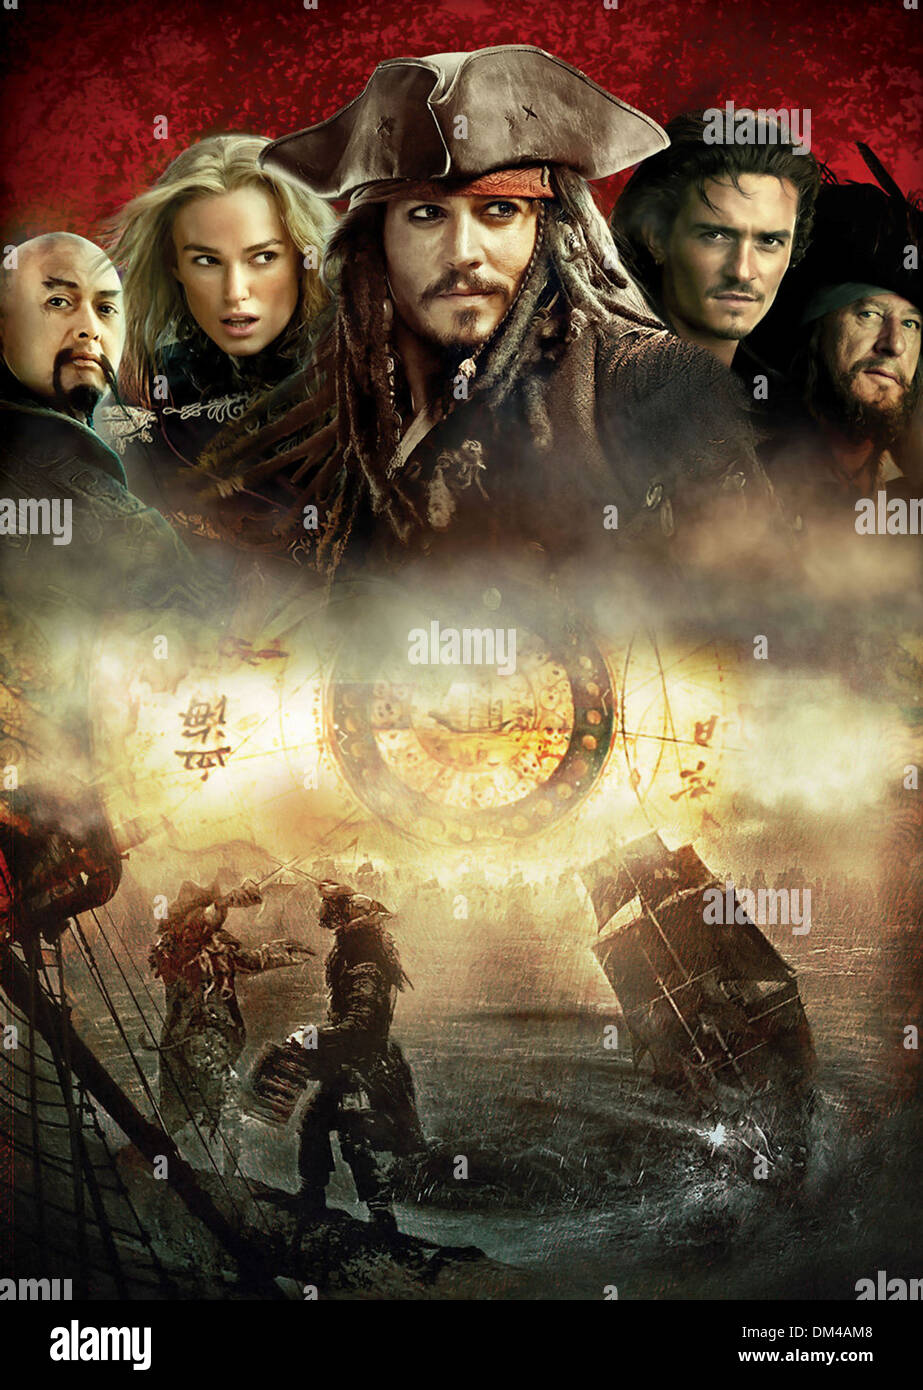 Incredible Compilation of 999+ Pirates of the Caribbean Images ...